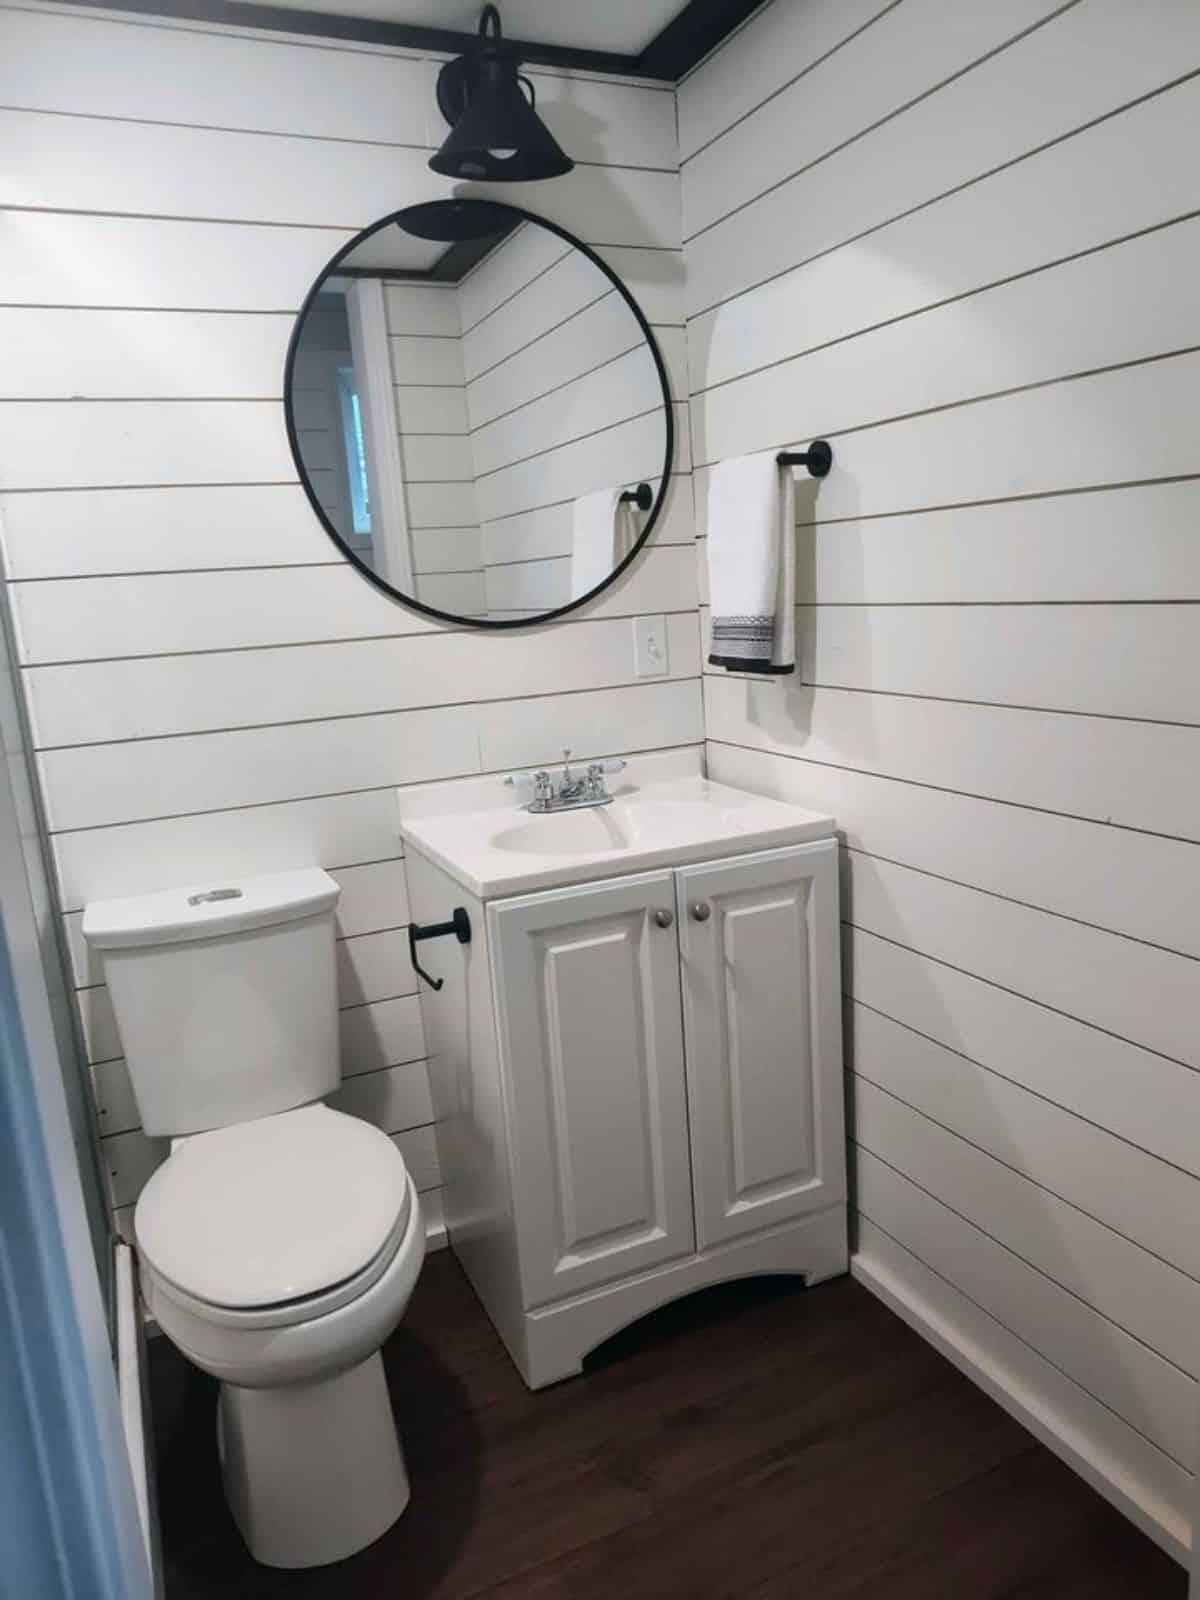 Sink with vanity & mirror and standard toilet in bathroom of 38’ Tiny House